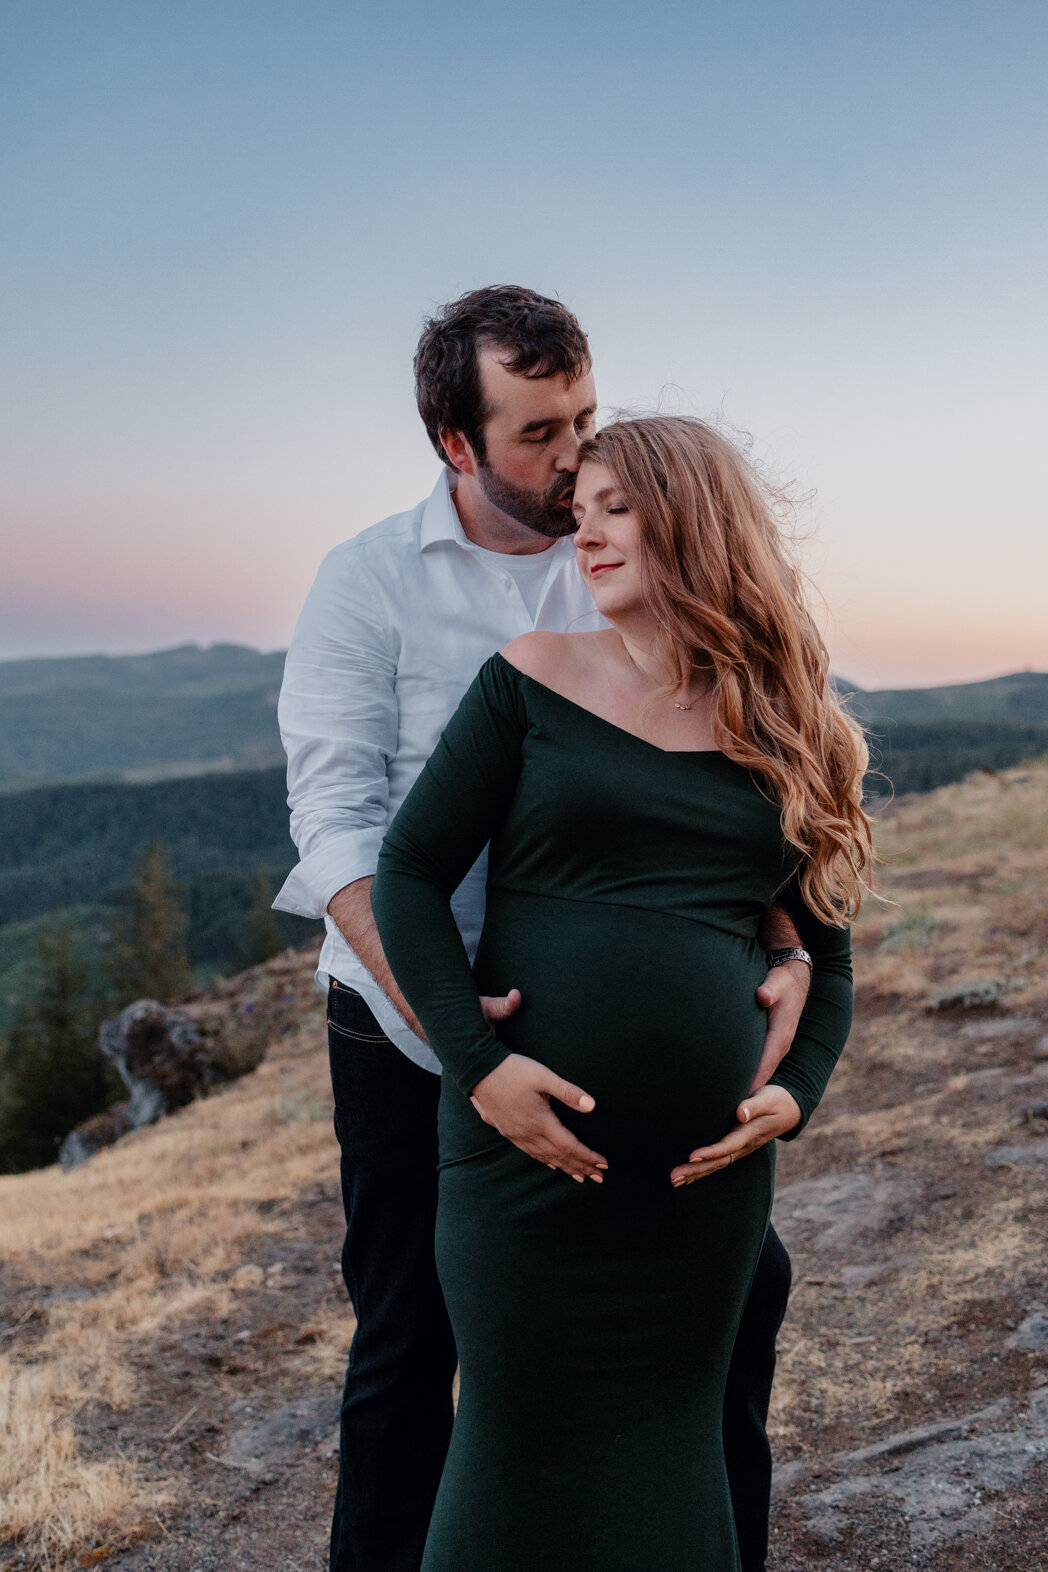 maternity photographer based in Eugene Oregon and serving Salem, Corvallis, Springfield, Cottage Grover, Albany, Newport, Yachats, Florence, Coos Bay, Reeds Port, and Roseburg Oregon